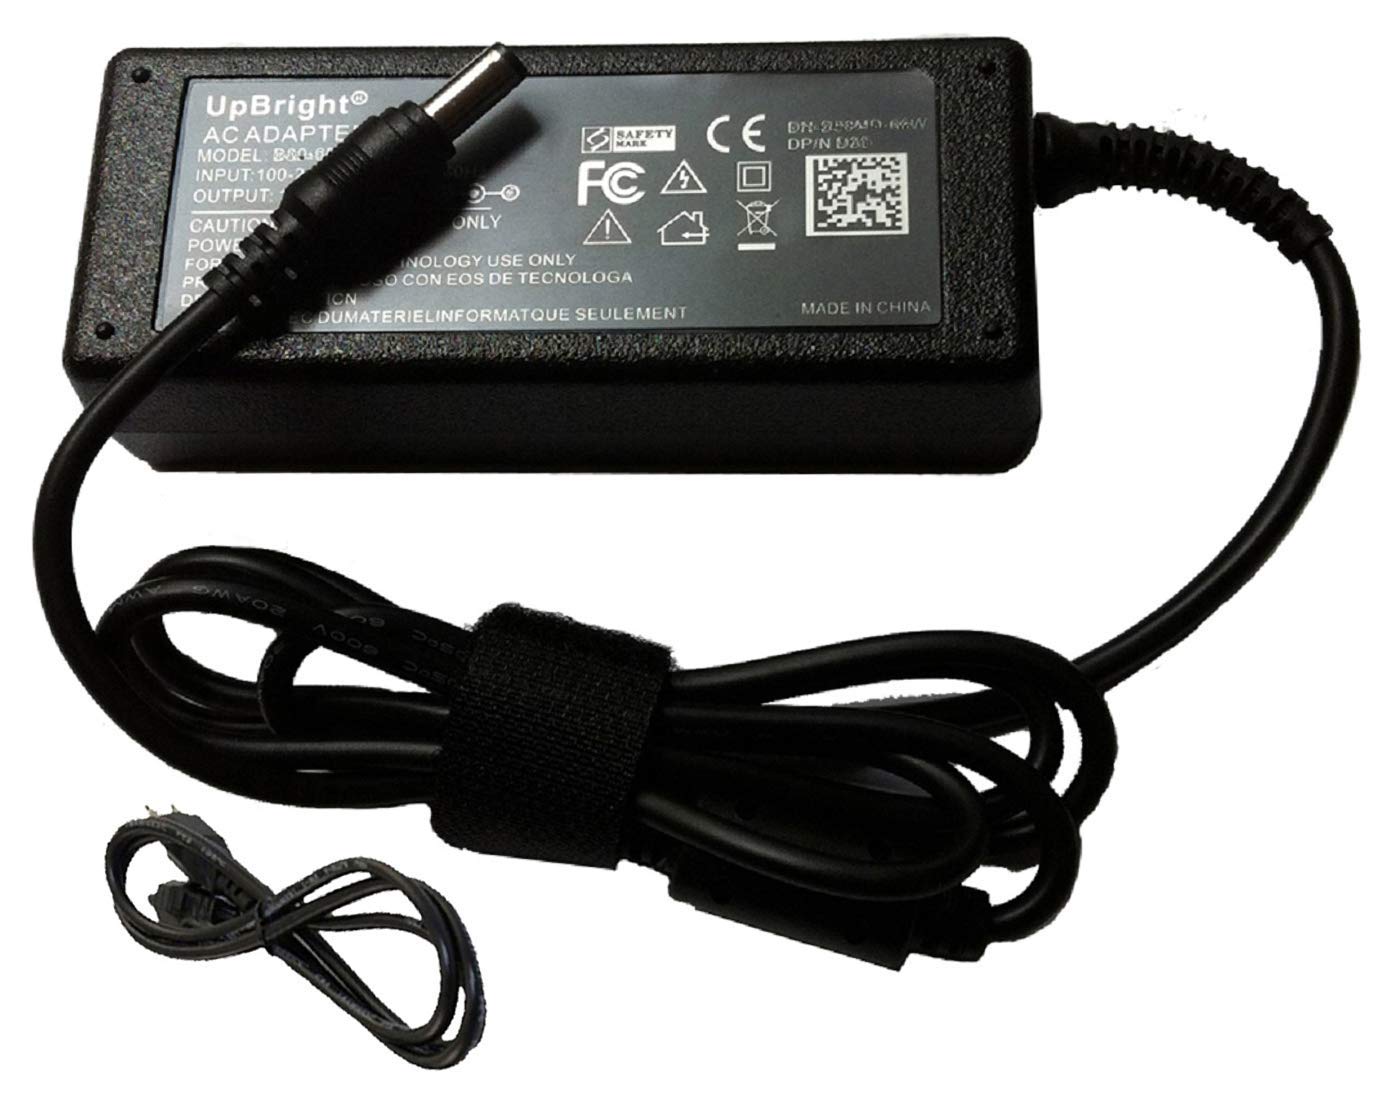 UpBright Global 12V 3.33A AC/DC Adapter For Check Point FSP040-DGAA1 9NA0402144 FSP040DGAA1 CheckPoint FSP 12.0V 12VDC 3.3A 40W Switching Power Supply Cord Cable Charger (w/Positive Inside Tip)